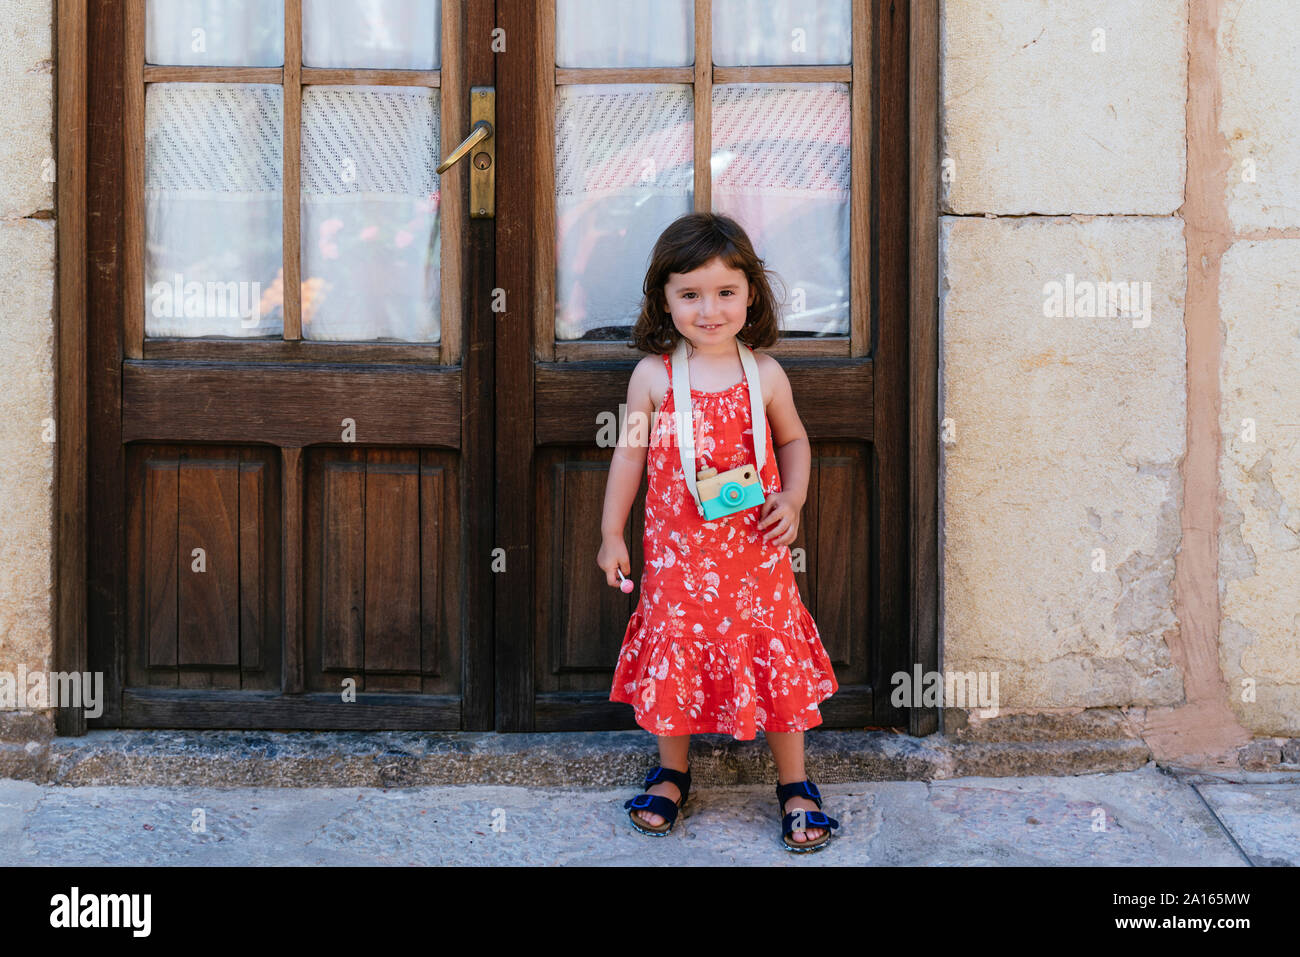 Portrait of smiling little girl with wooden toy camera wearing red dress with floral design Stock Photo